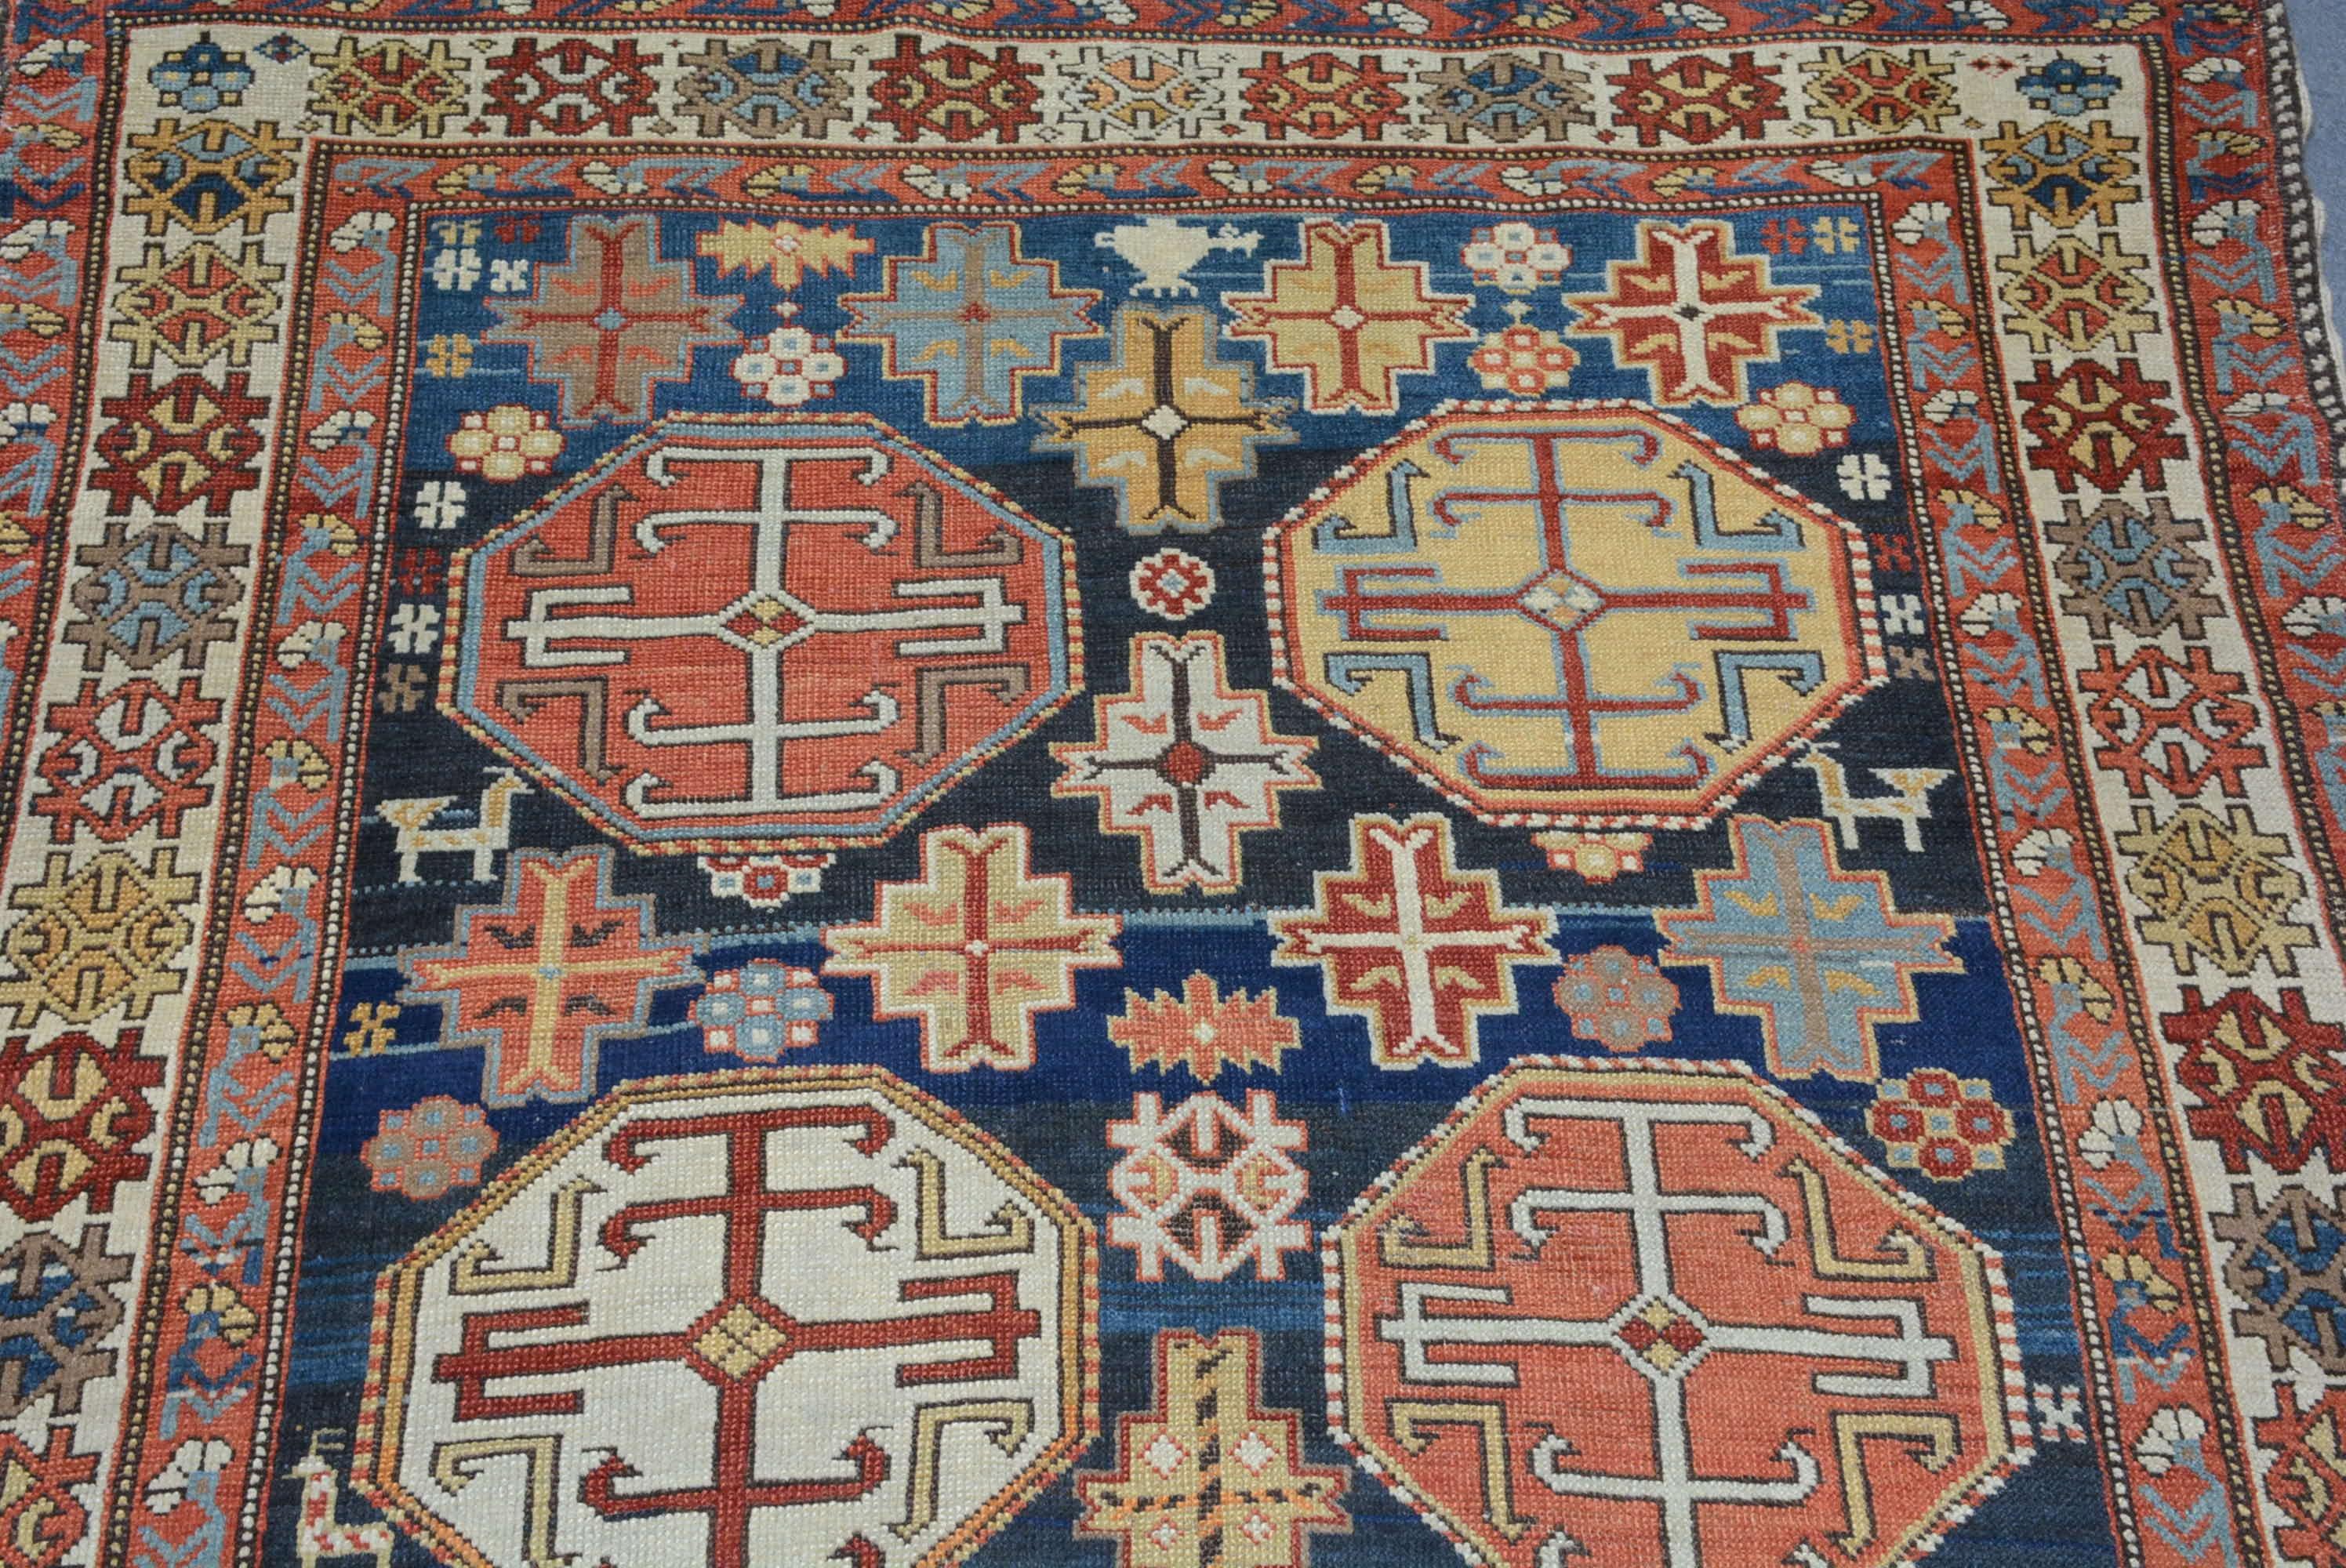 The Shirvan region in the eastern Caucasus is one of the principle weaving centers in that region.  This area is known for producing bold geometric patterns executed in primary colors.  This rug has two columns of octagonal medallions on an indigo